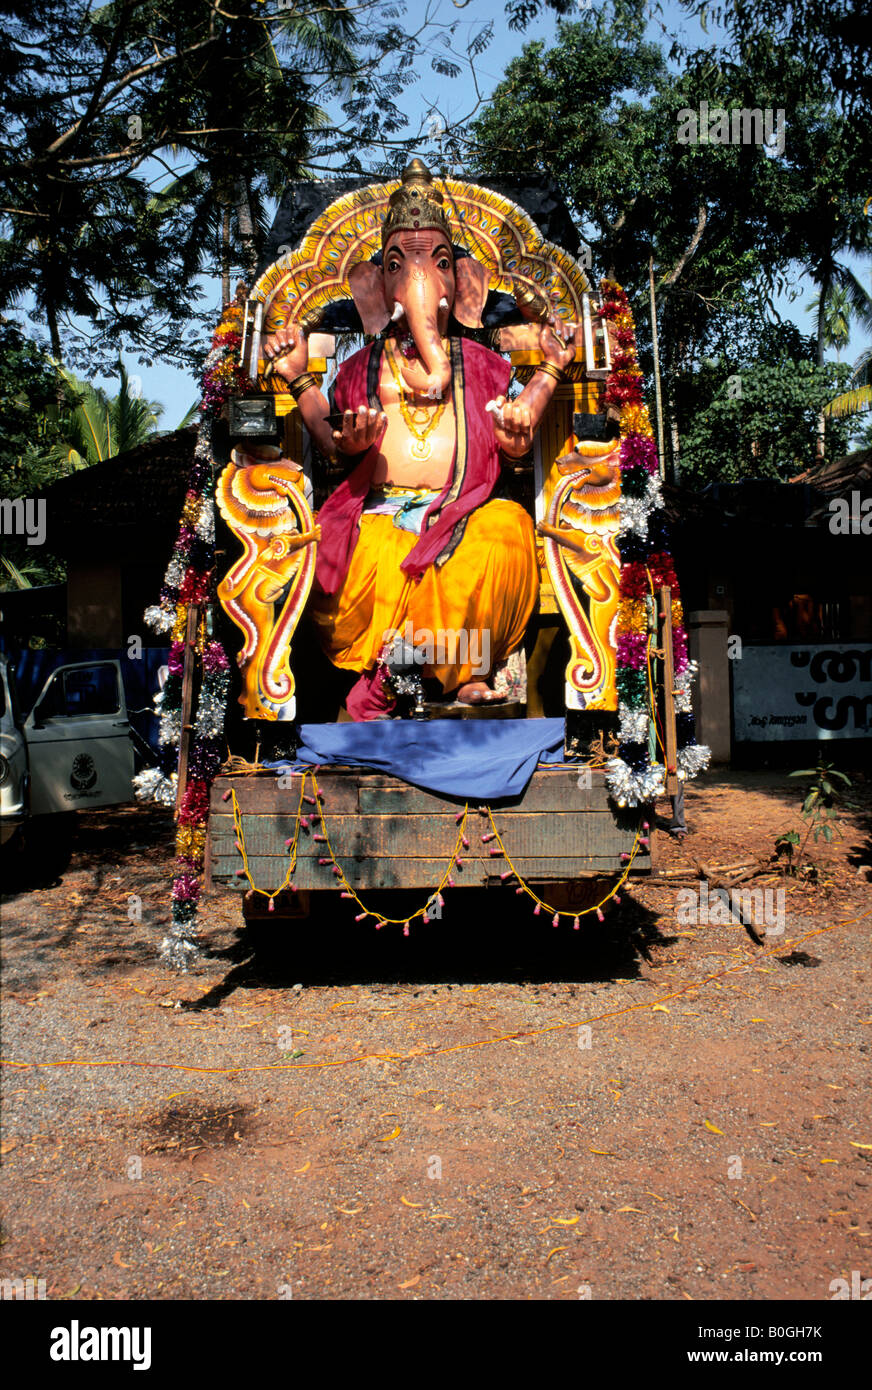 A giant model of Ganesh the Elephant God on the back of a lorry, Kerala, India. Stock Photo